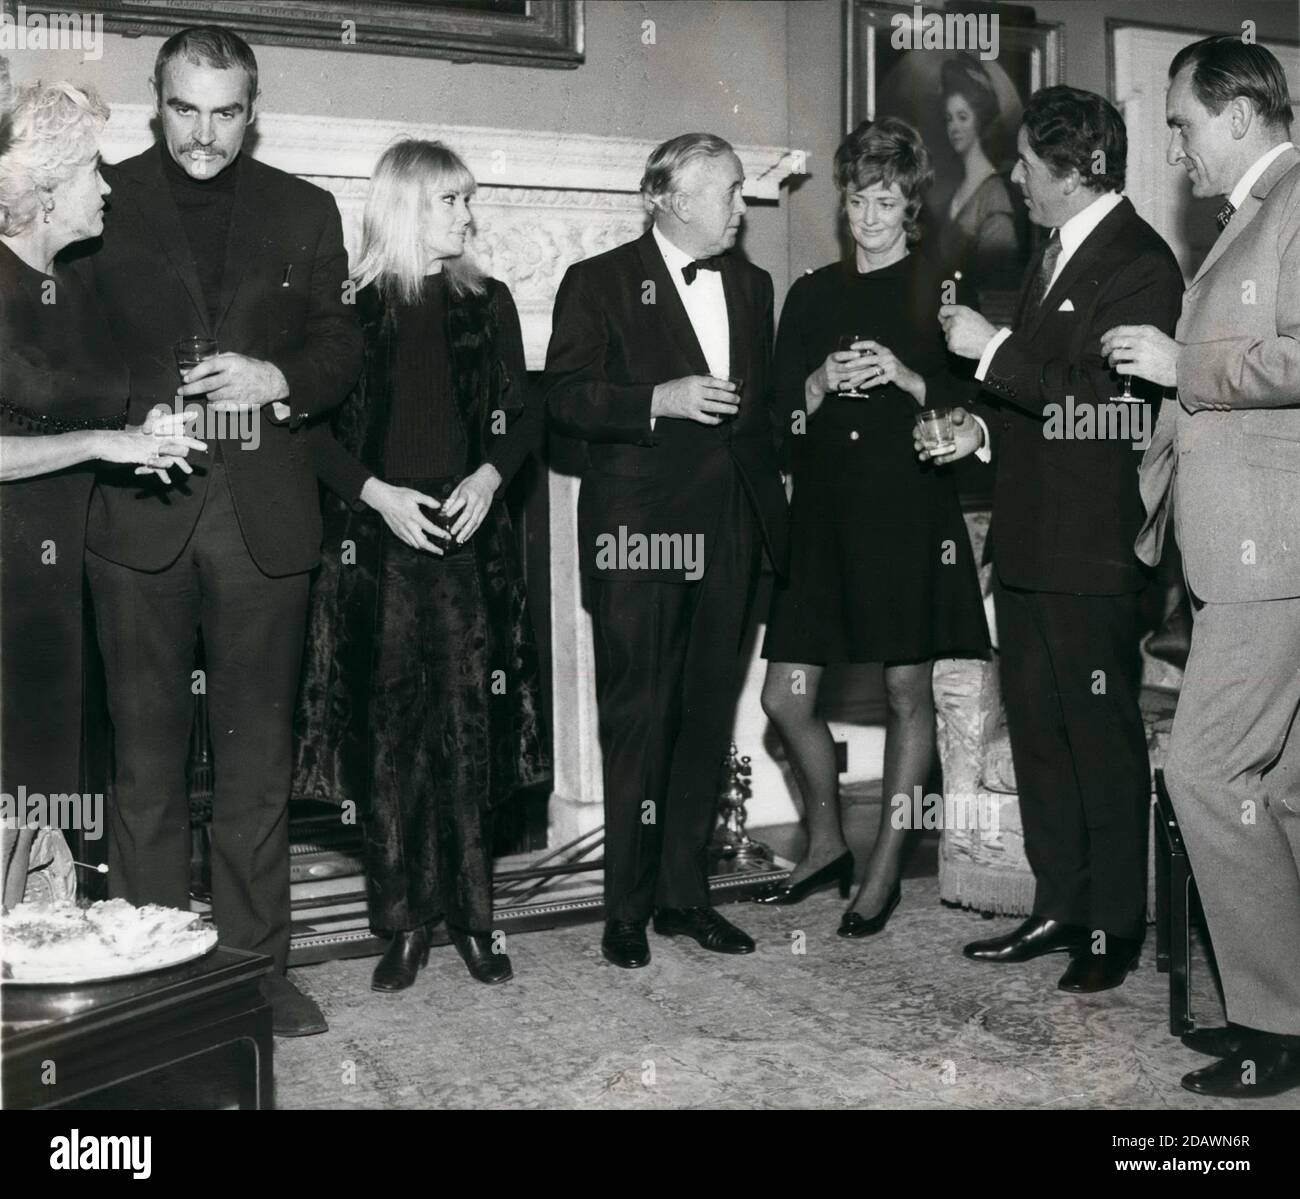 Dec. 12, 1969 - London, England, United Kingdom - The Prime Minister HAROLD WILSON, center, and his wife host an arts council reception at No. 10 Downing Street in support of Theatre Organisation for Children and Young People. Photo shows, from left, JENNIE LEE, Minister with Special Responsibility for the Arts; actor SEAN CONNERY, his wife actress DIANE CILENTO, PM Wilson, actress ELSPET GRAY, Actor BRIAN RIX and ERIC PORTER. (Credit Image: © Keystone Press Agency/Keystone USA via ZUMAPRESS.com) Stock Photo